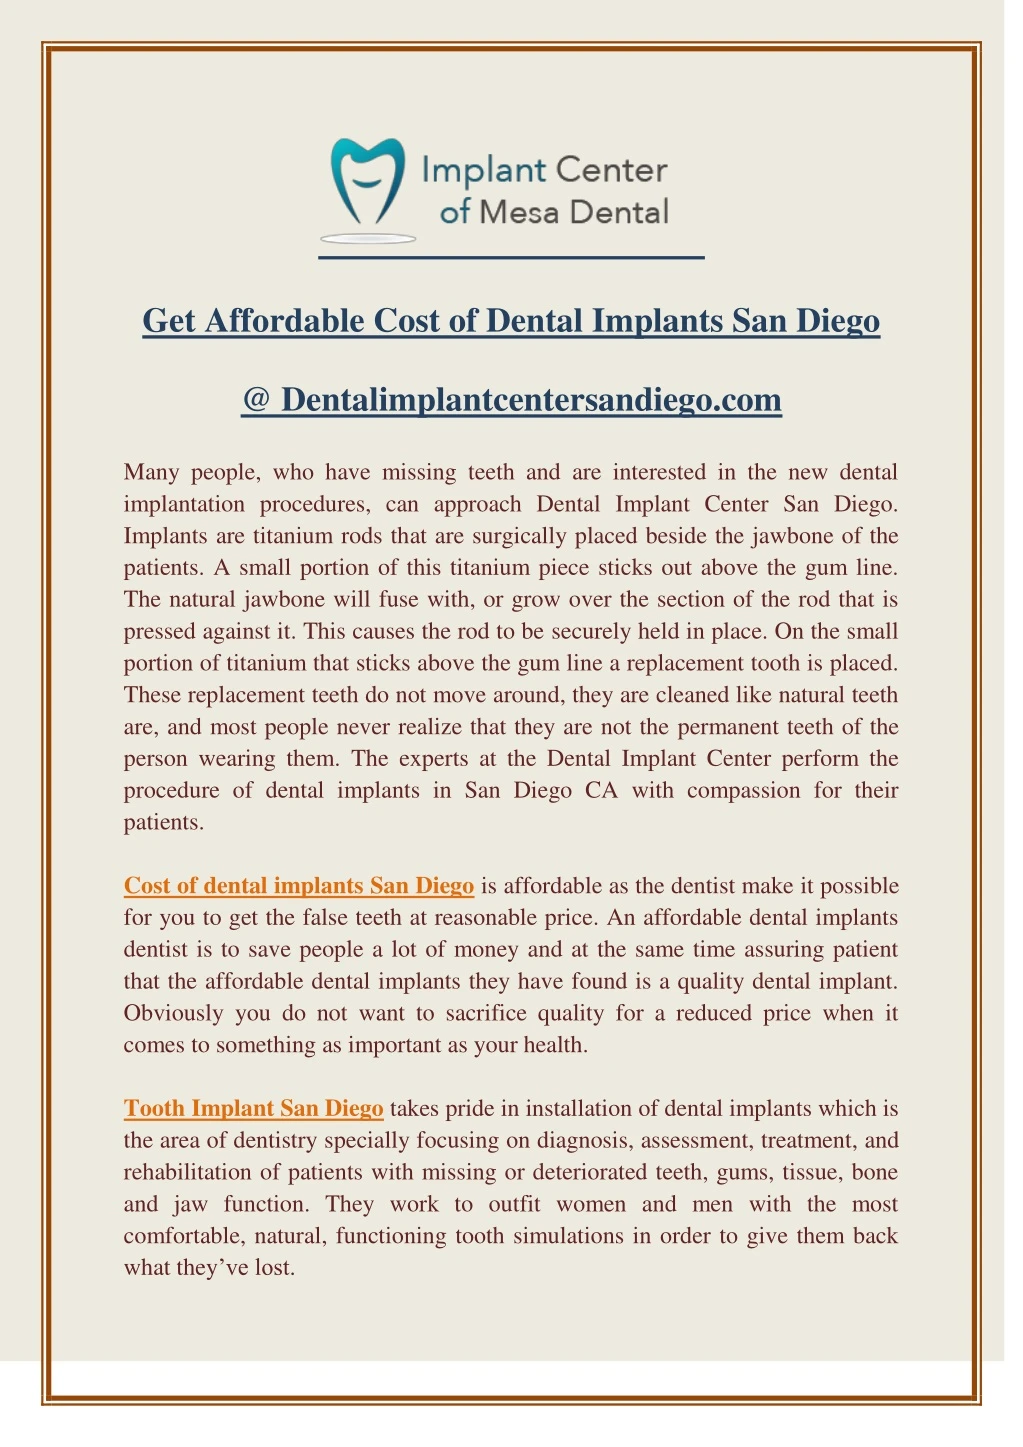 get affordable cost of dental implants san diego